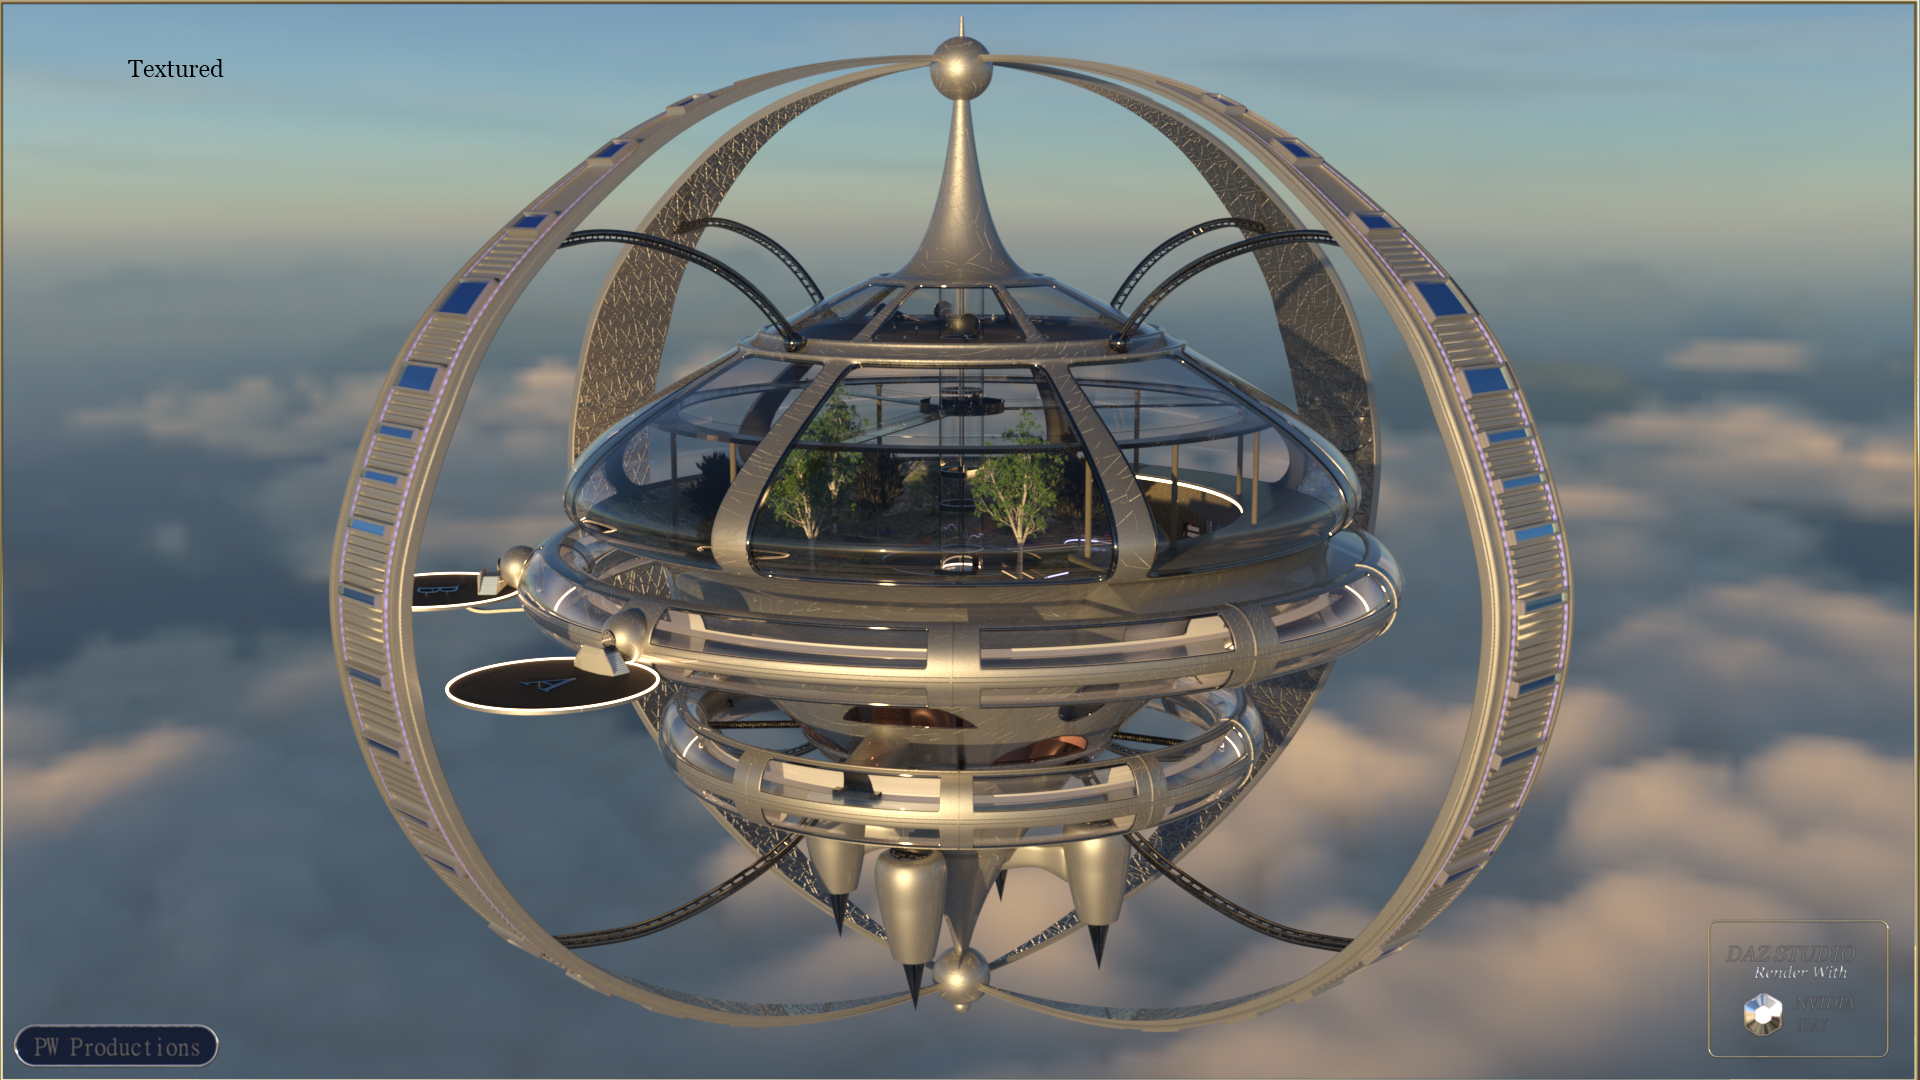 PW Nirvana Space Station by: PW Productions, 3D Models by Daz 3D